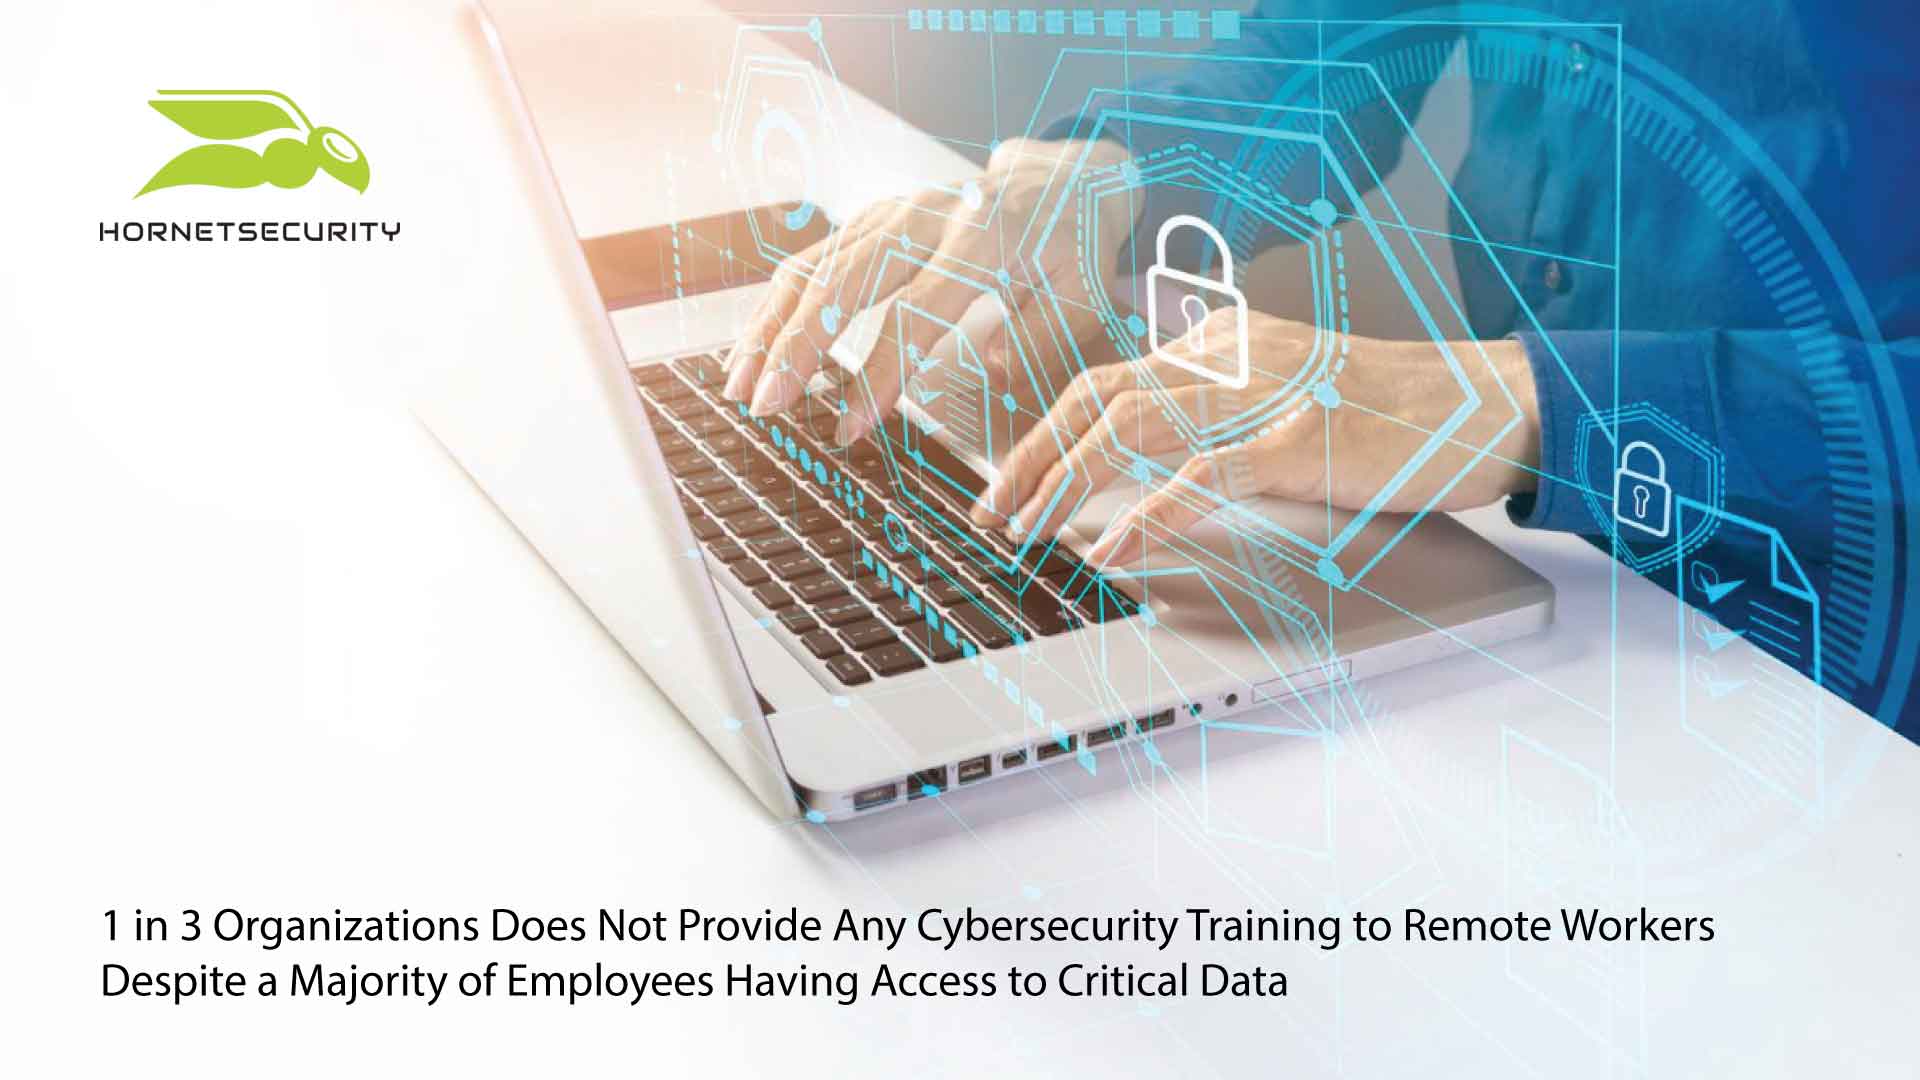 1 in 3 Organizations Does Not Provide Any Cybersecurity Training to Remote Workers Despite a Majority of Employees Having Access to Critical Data